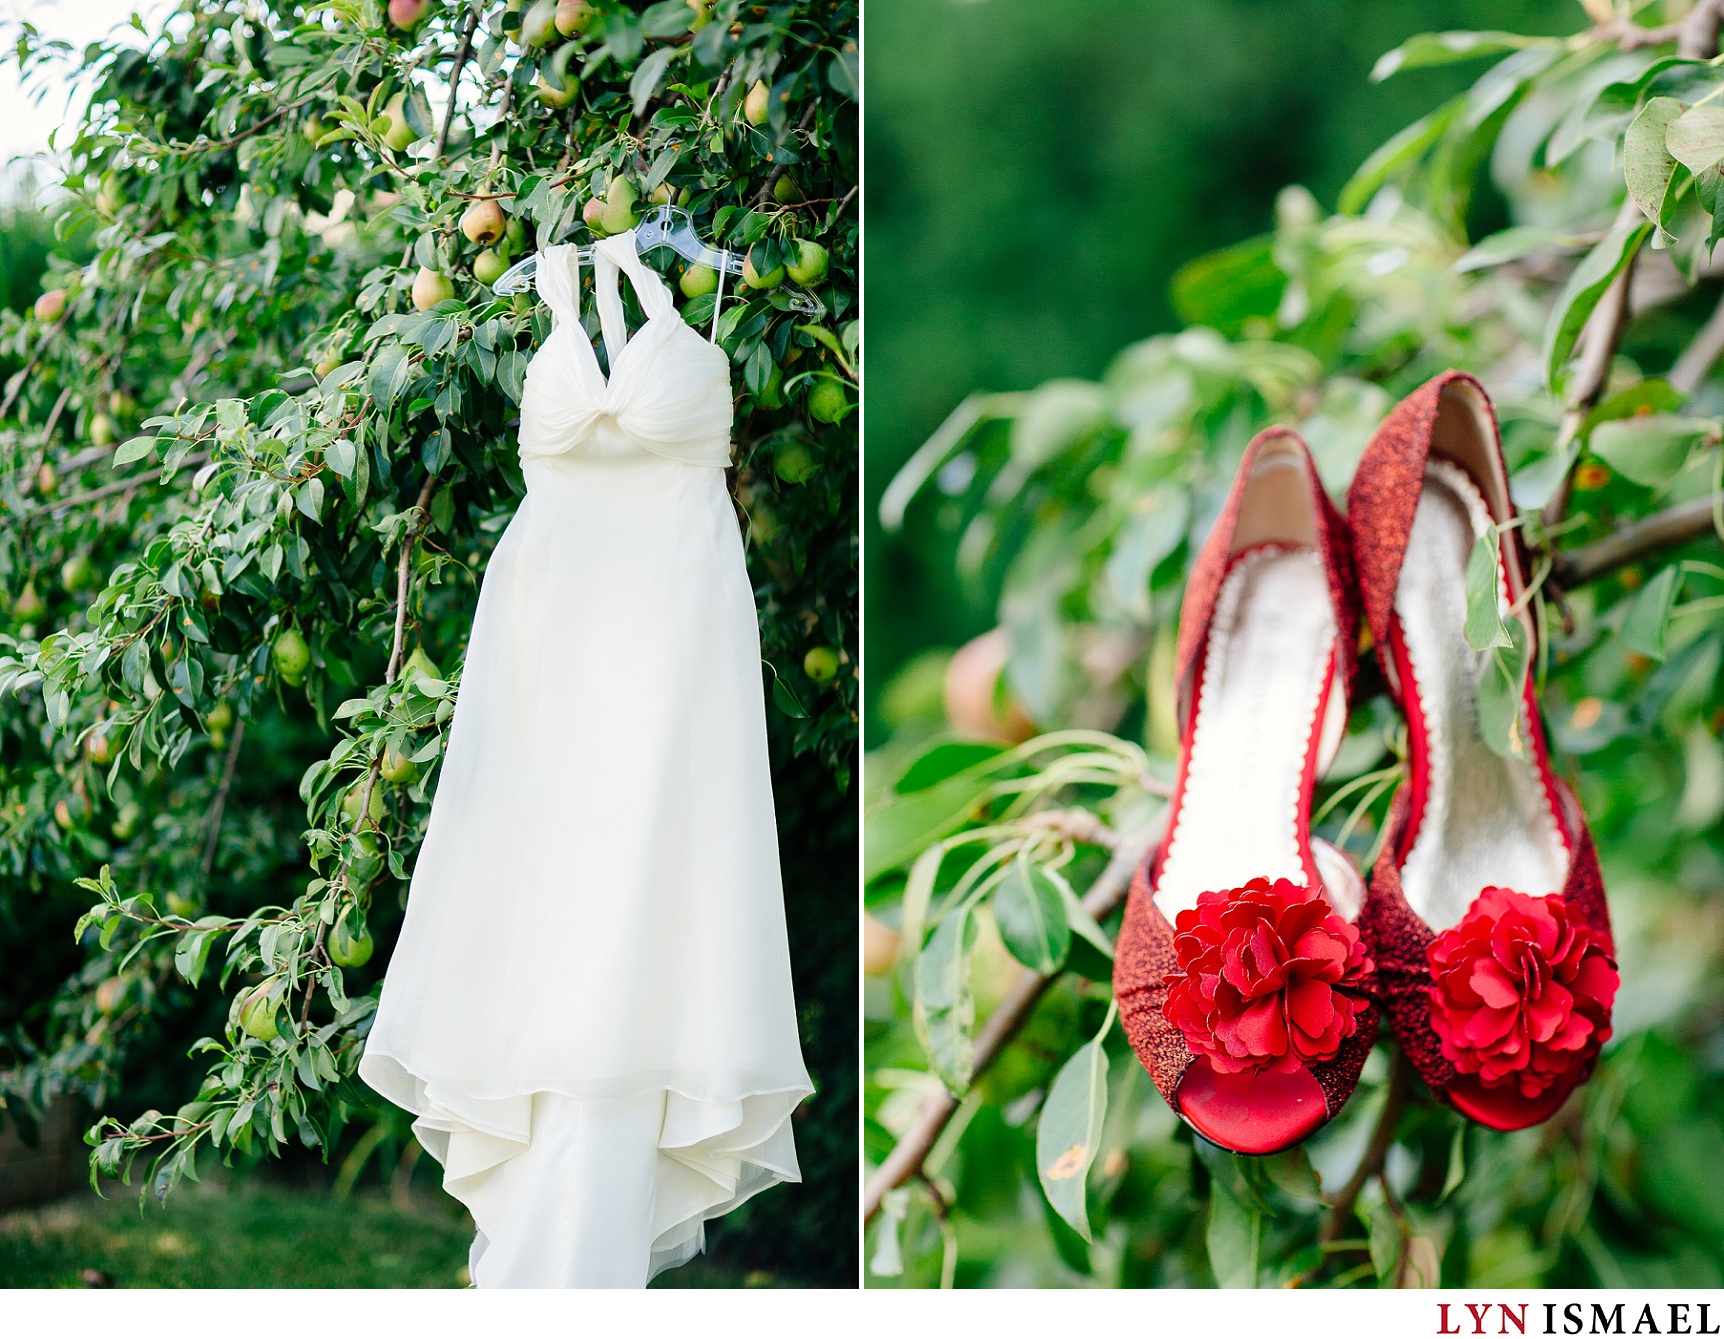 Rivini wedding dress and red shoes hanging in a pear tree